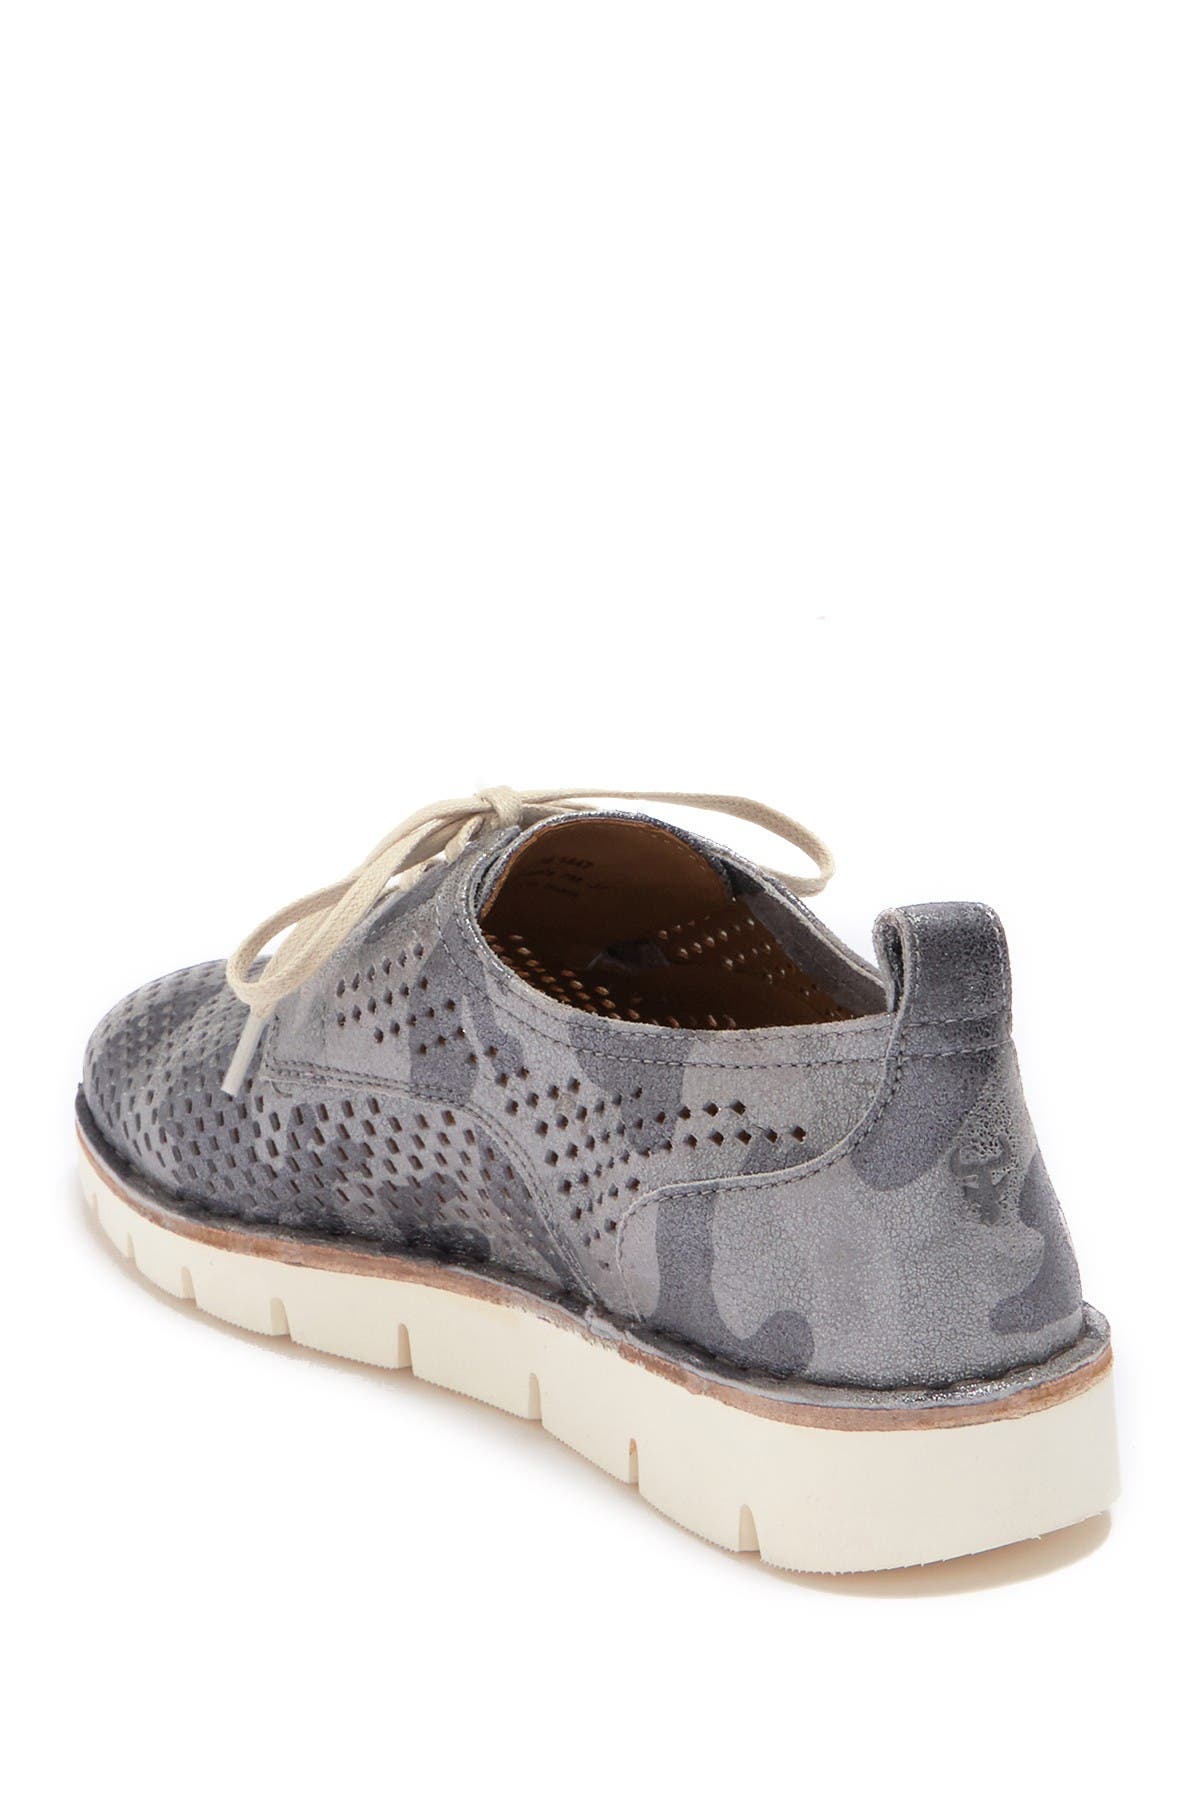 trask lena perforated oxfords